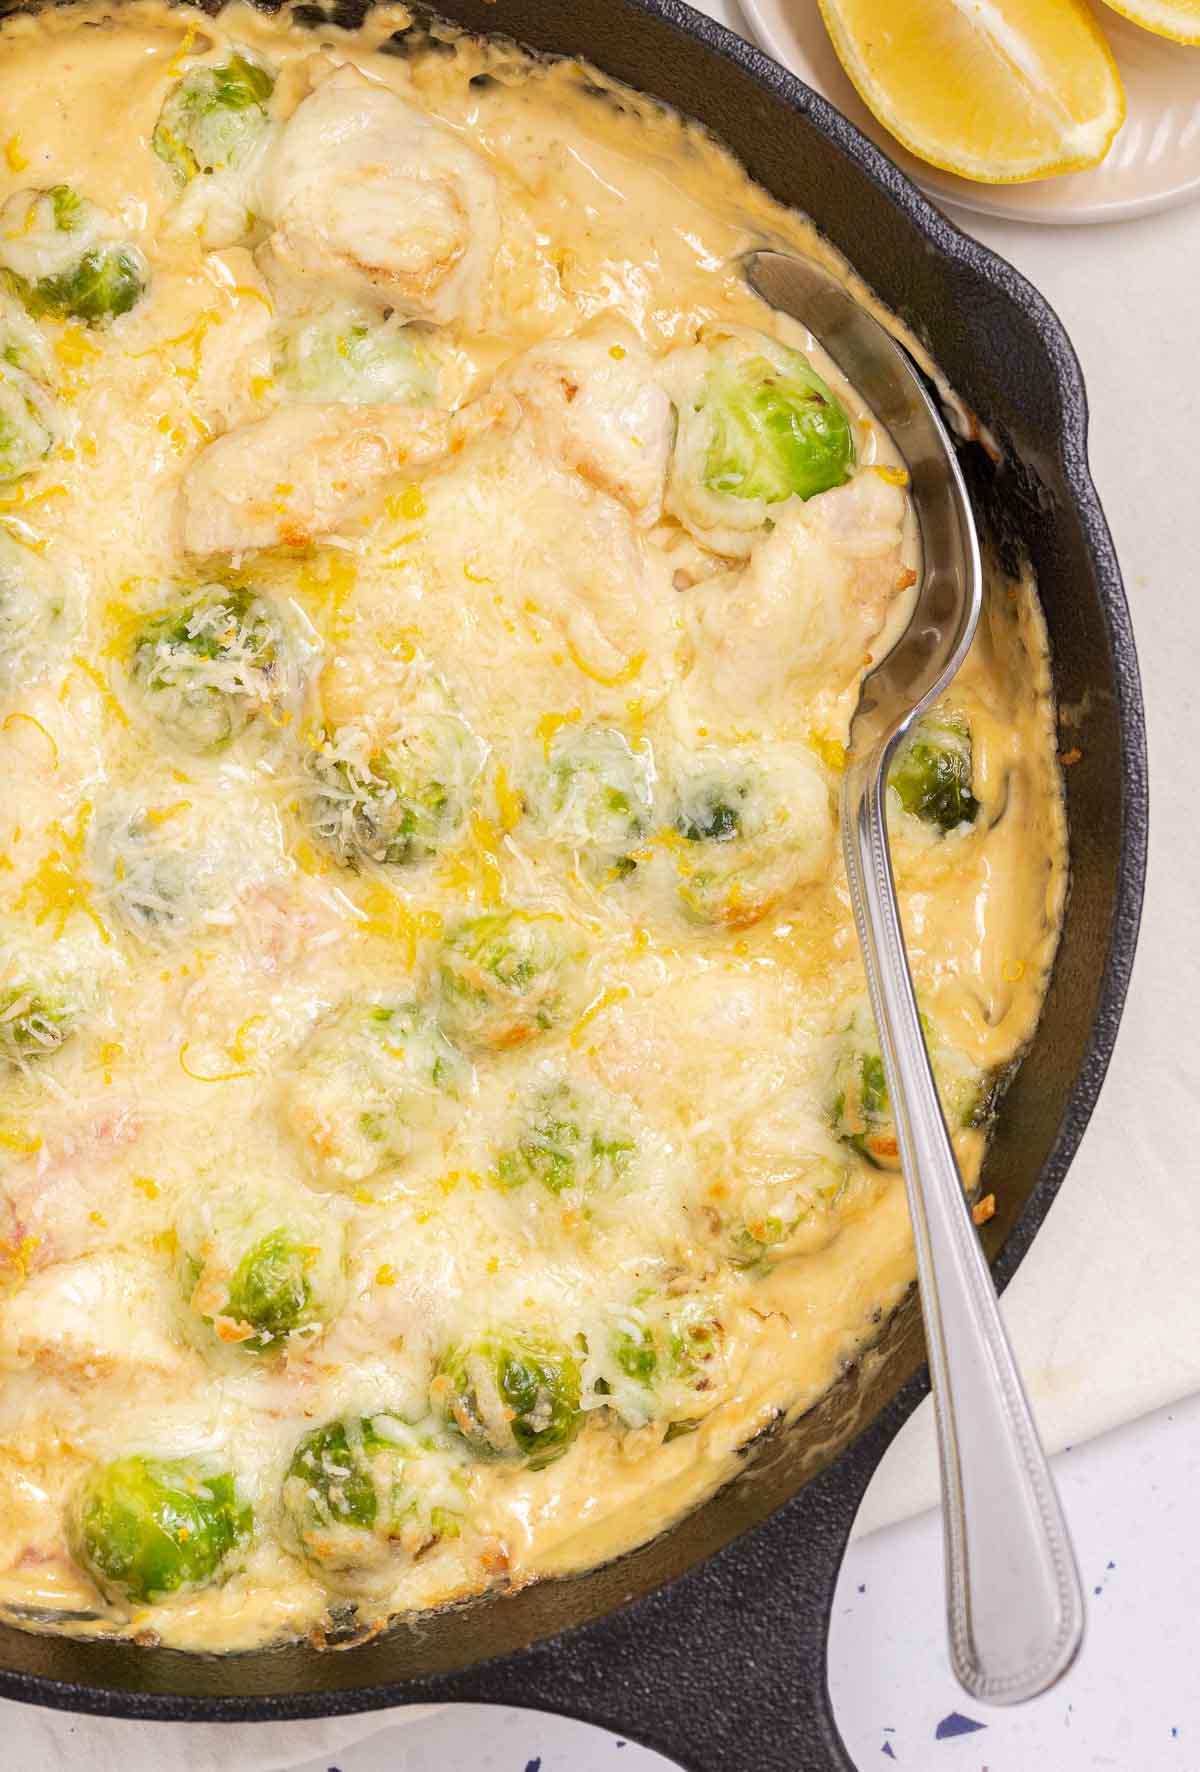 A skillet with chicken, bacon and Brussels sprouts in a creamy Parmesan sauce.